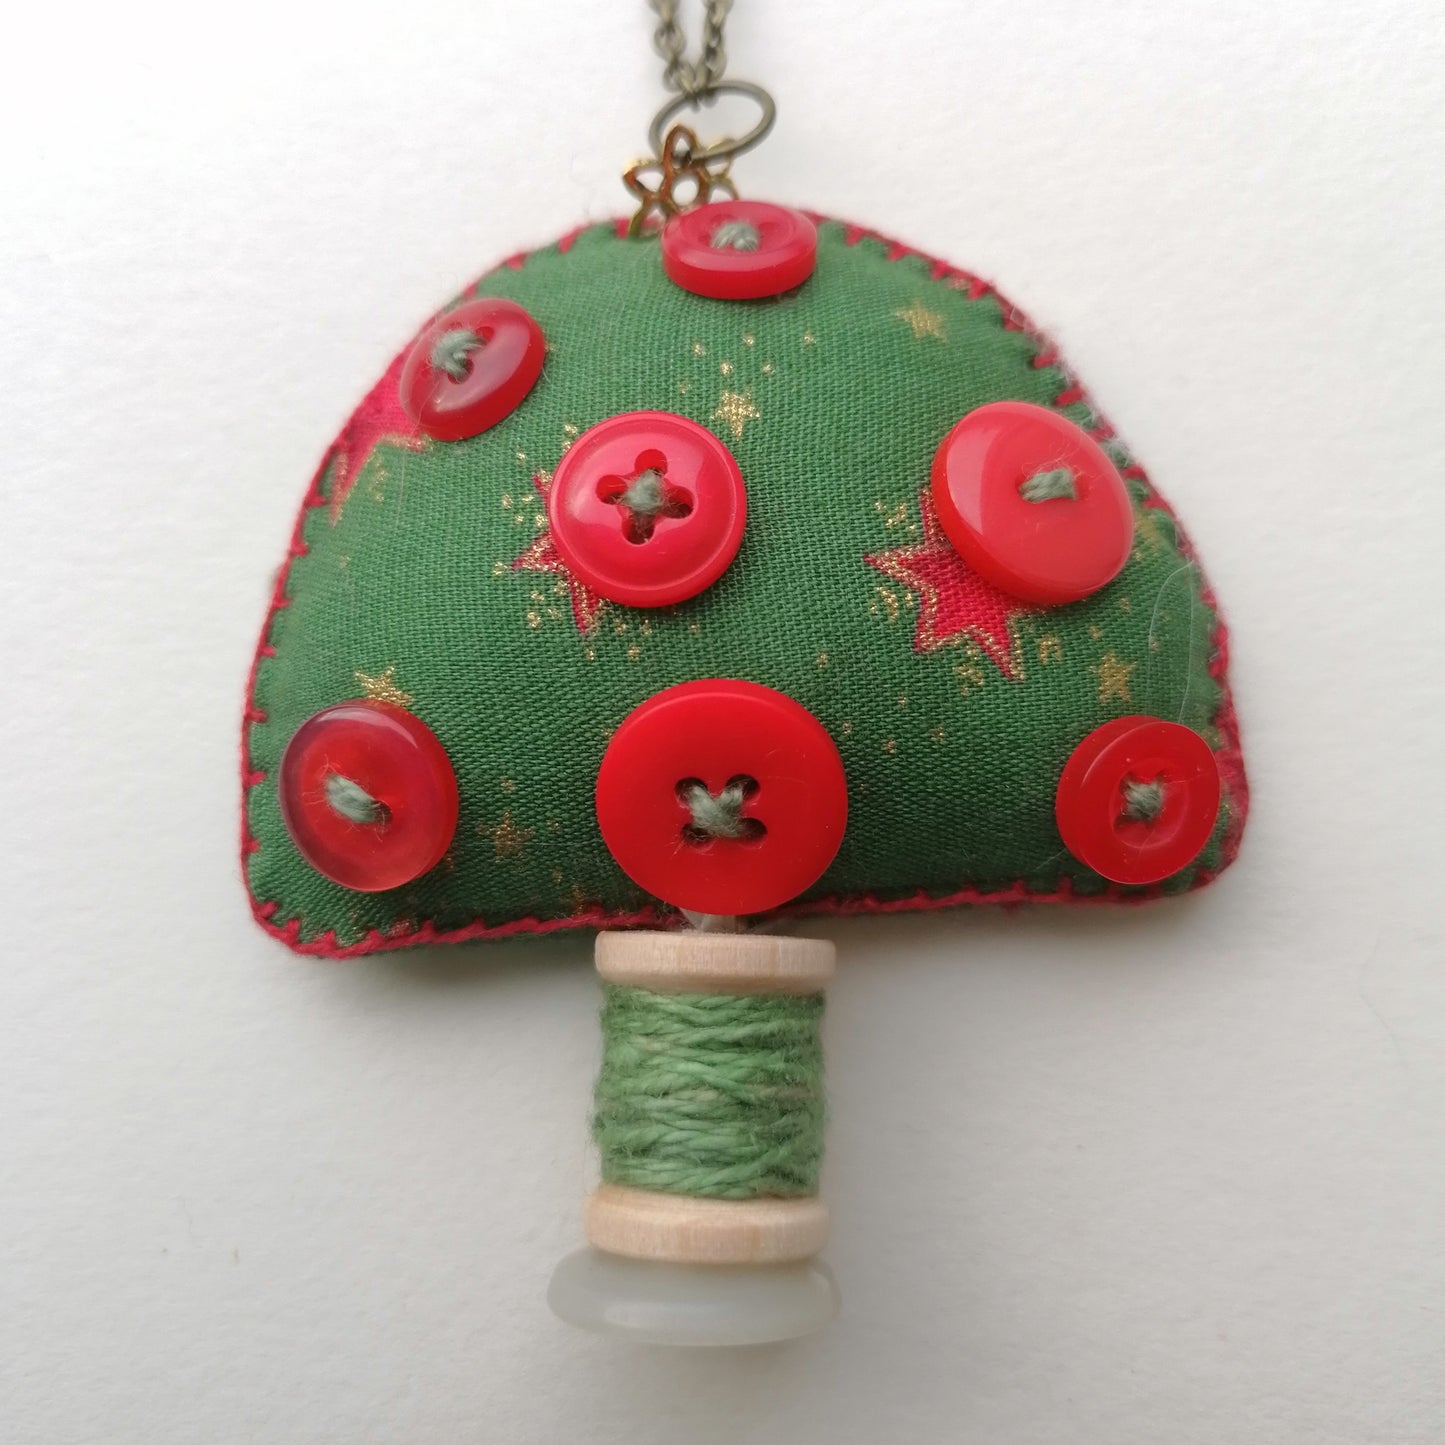 Green Fabric toadstool ornament with red buttons and wooden spool.